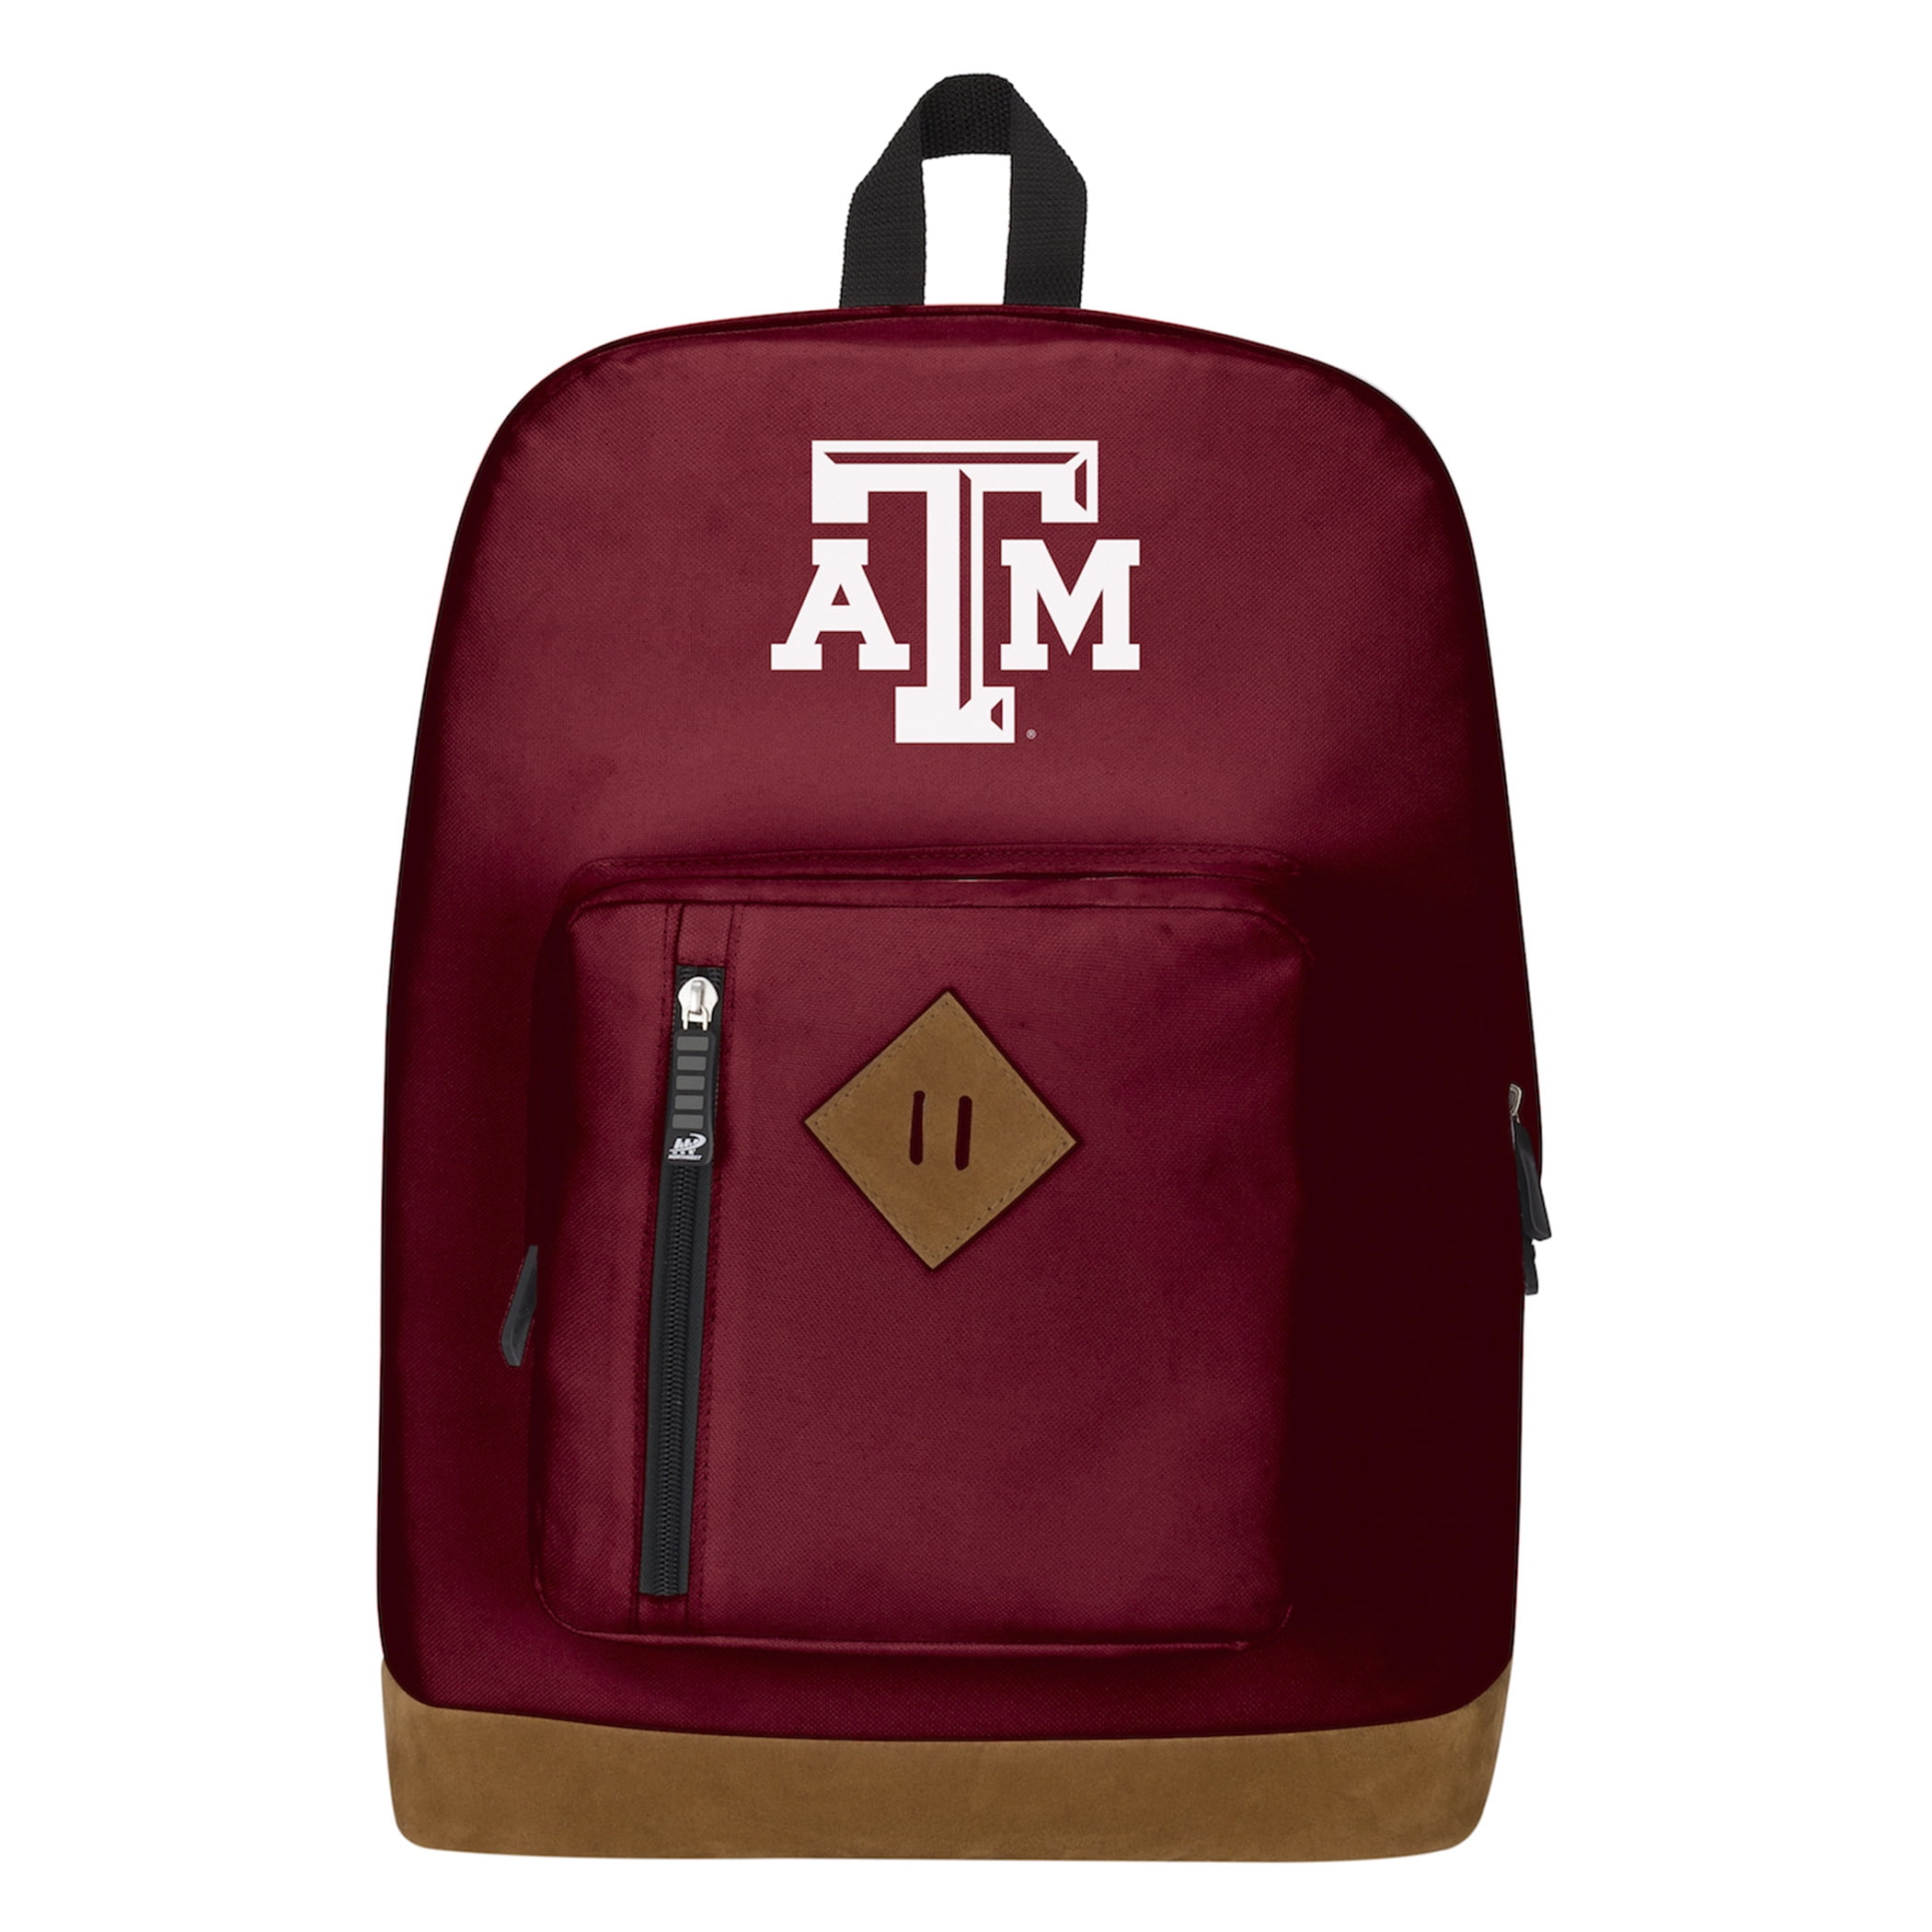 Texas A&M Backpack BEST Texas A&M Aggies Backpacks CLASSIC STYLE 